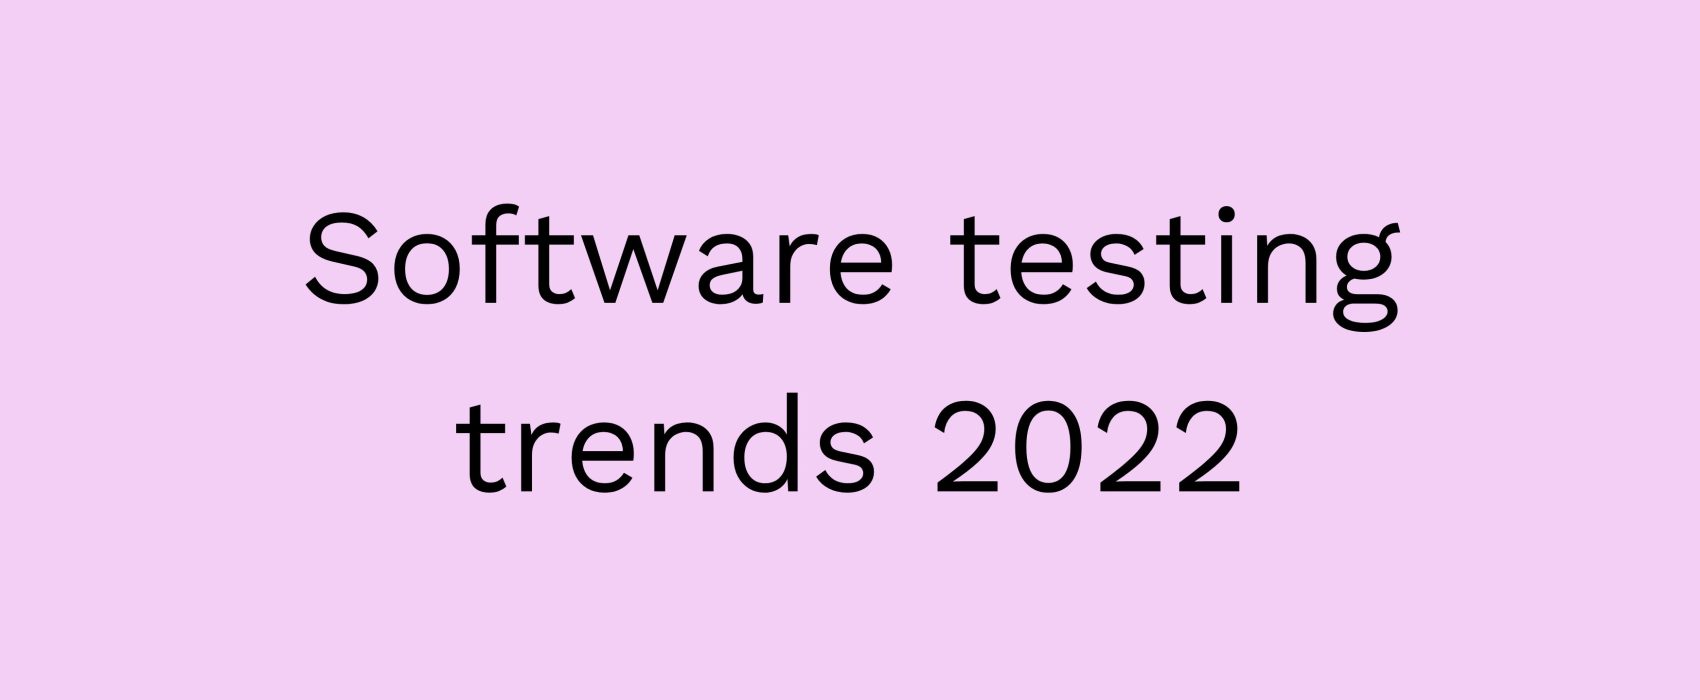 SW testing trends 2022